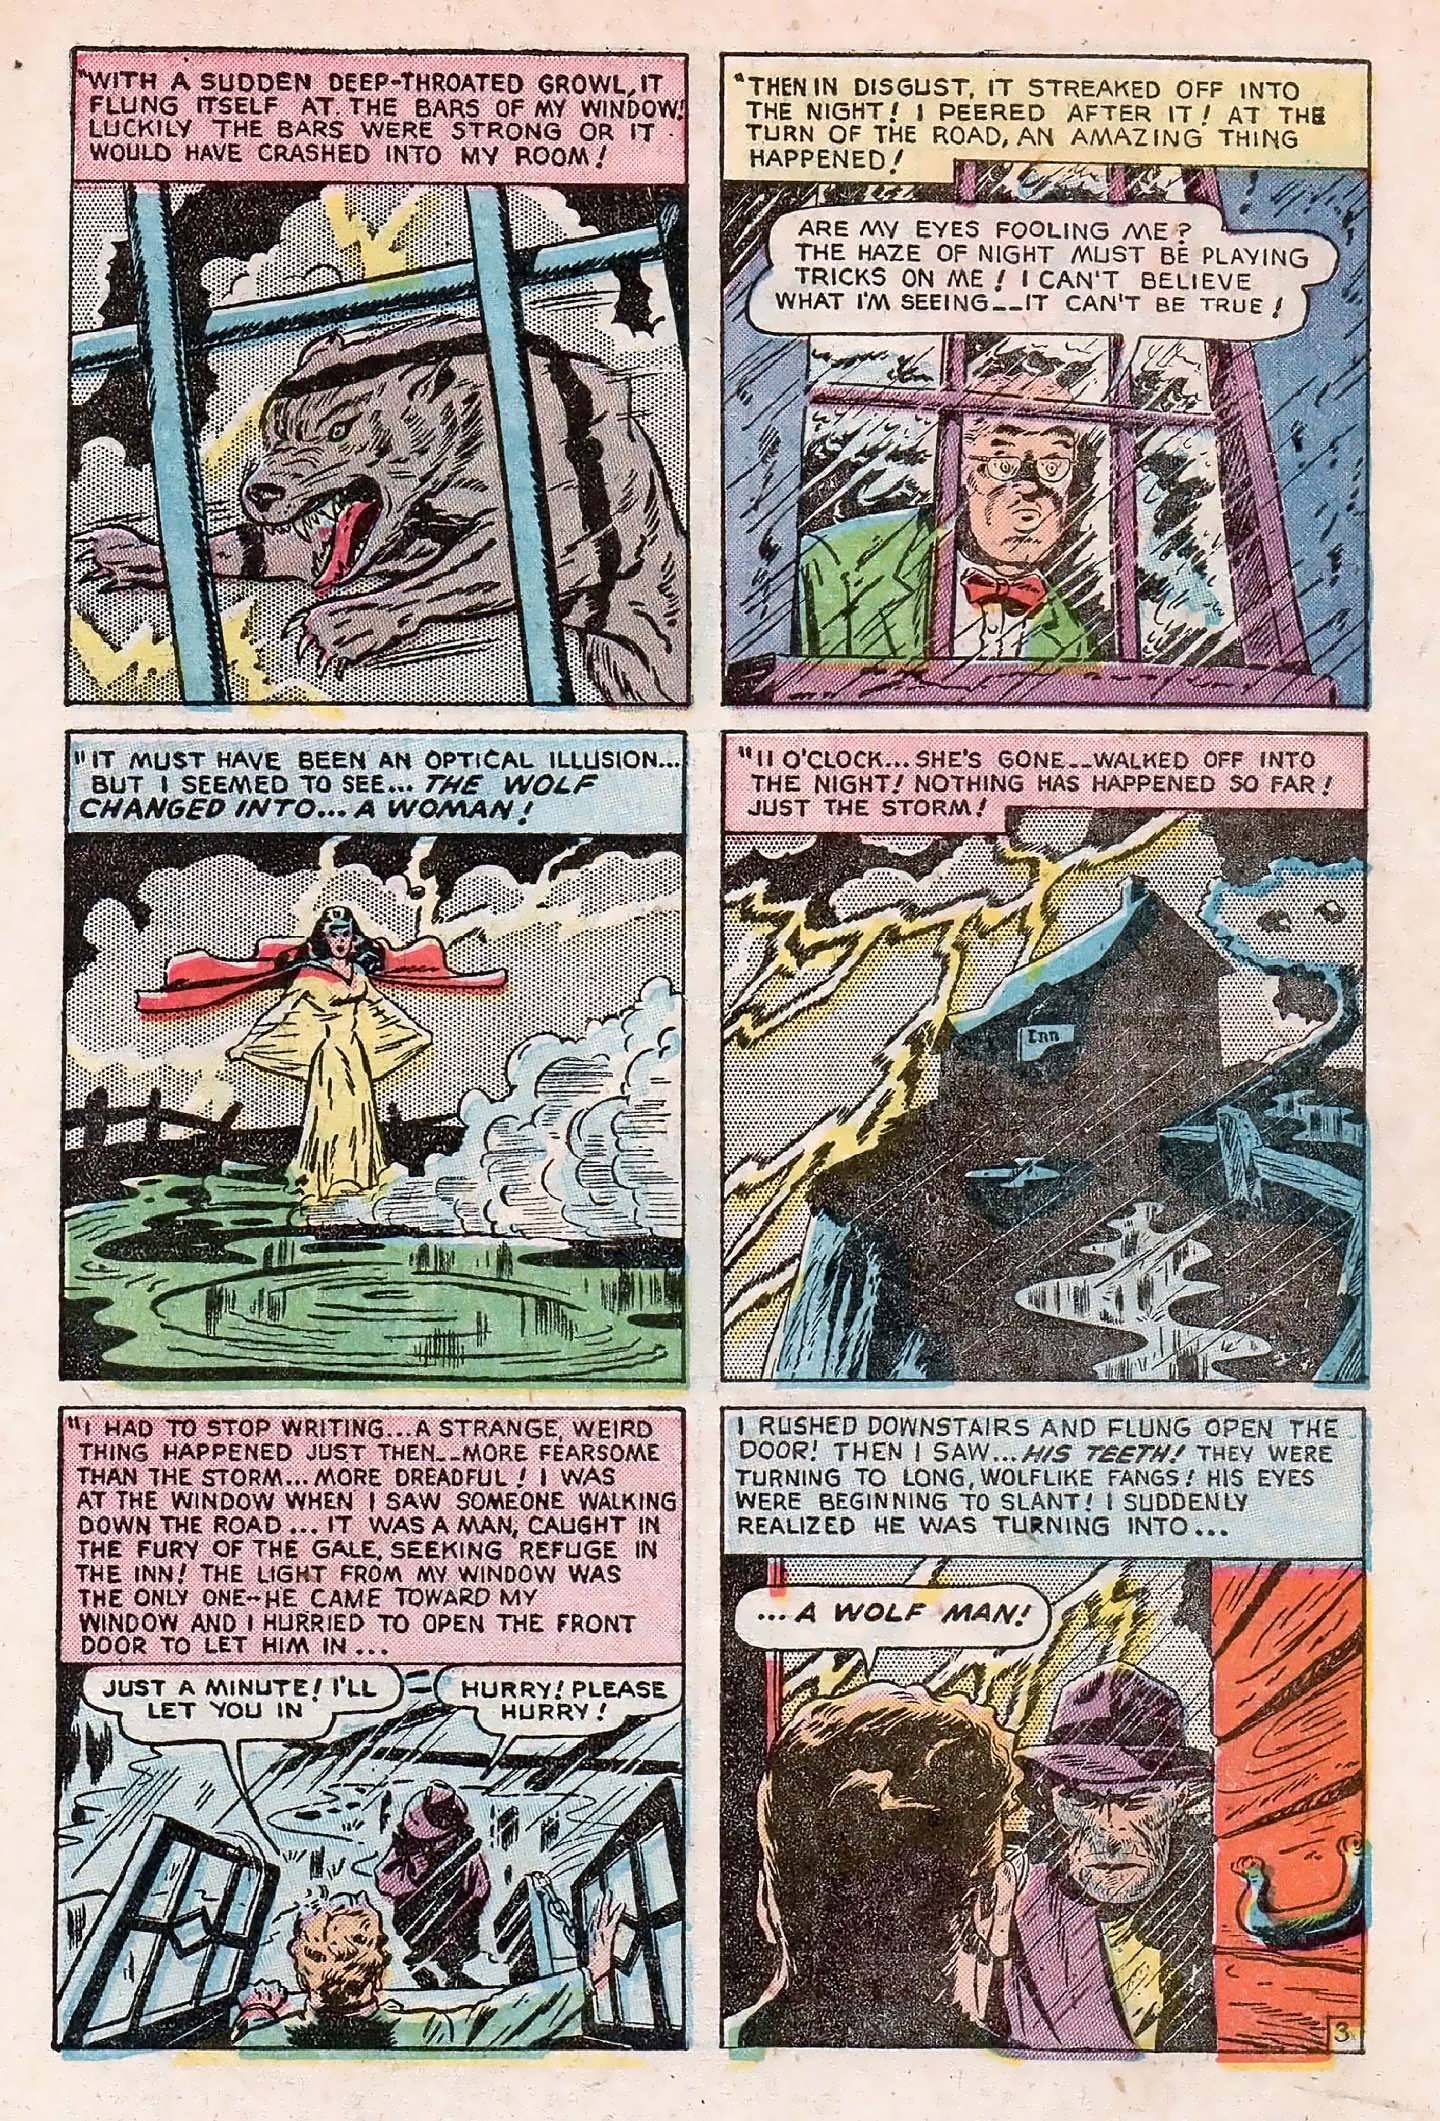 Marvel Tales (1949) 93 Page 4